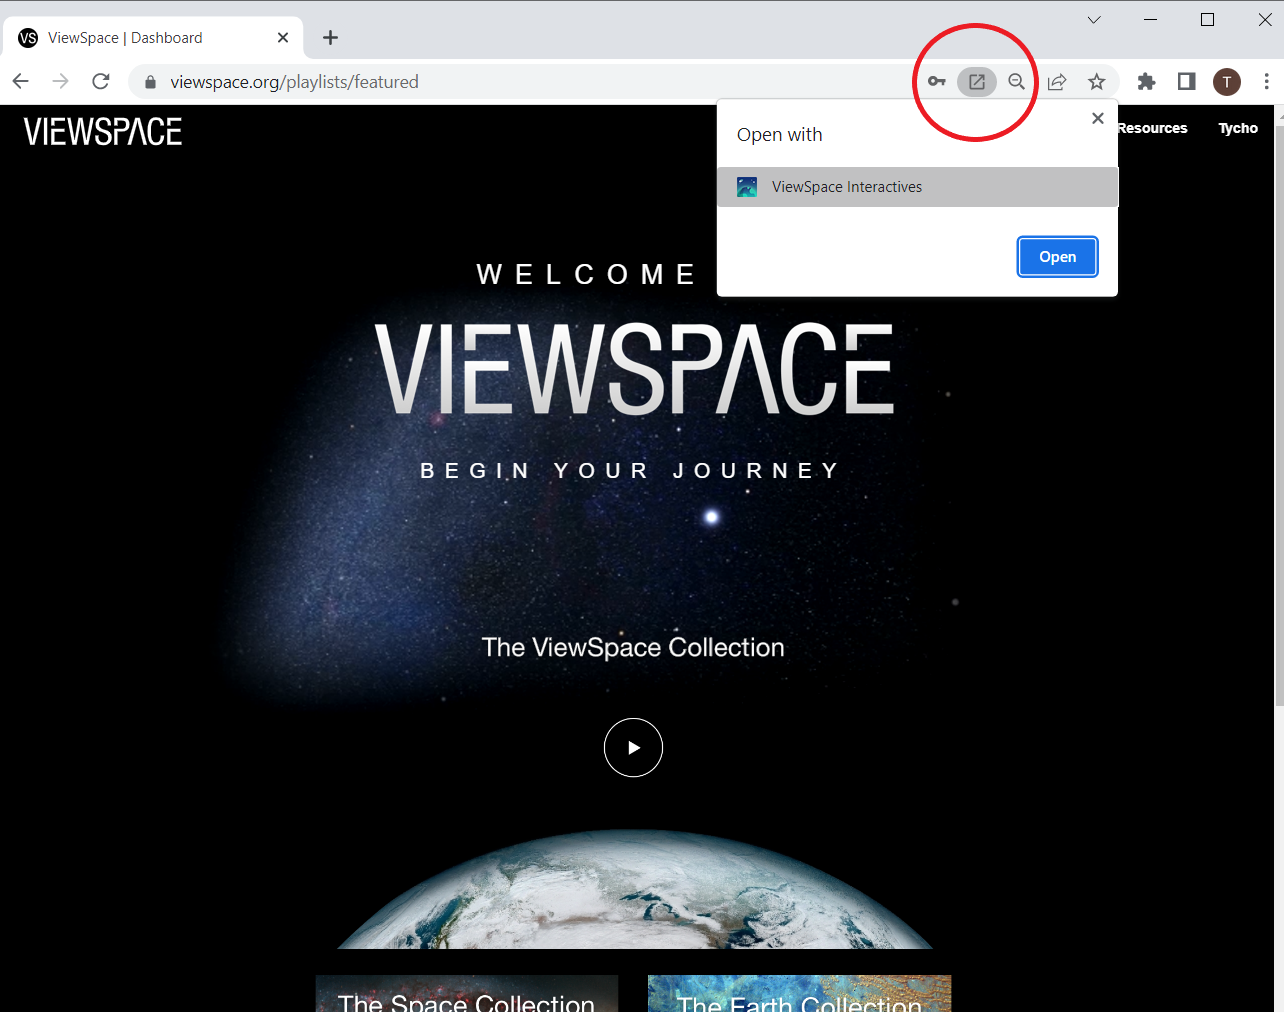 Screenshot of the ViewSpace home page. On the right side of the browser bar is a launch icon that is circled, which resembles a box with an arrow pointing out of it diagonally upward to the right. Below the icon is a popup with the words Open with and ViewSpace Interactives. A highlighted Open button is at the bottom right of the popup.